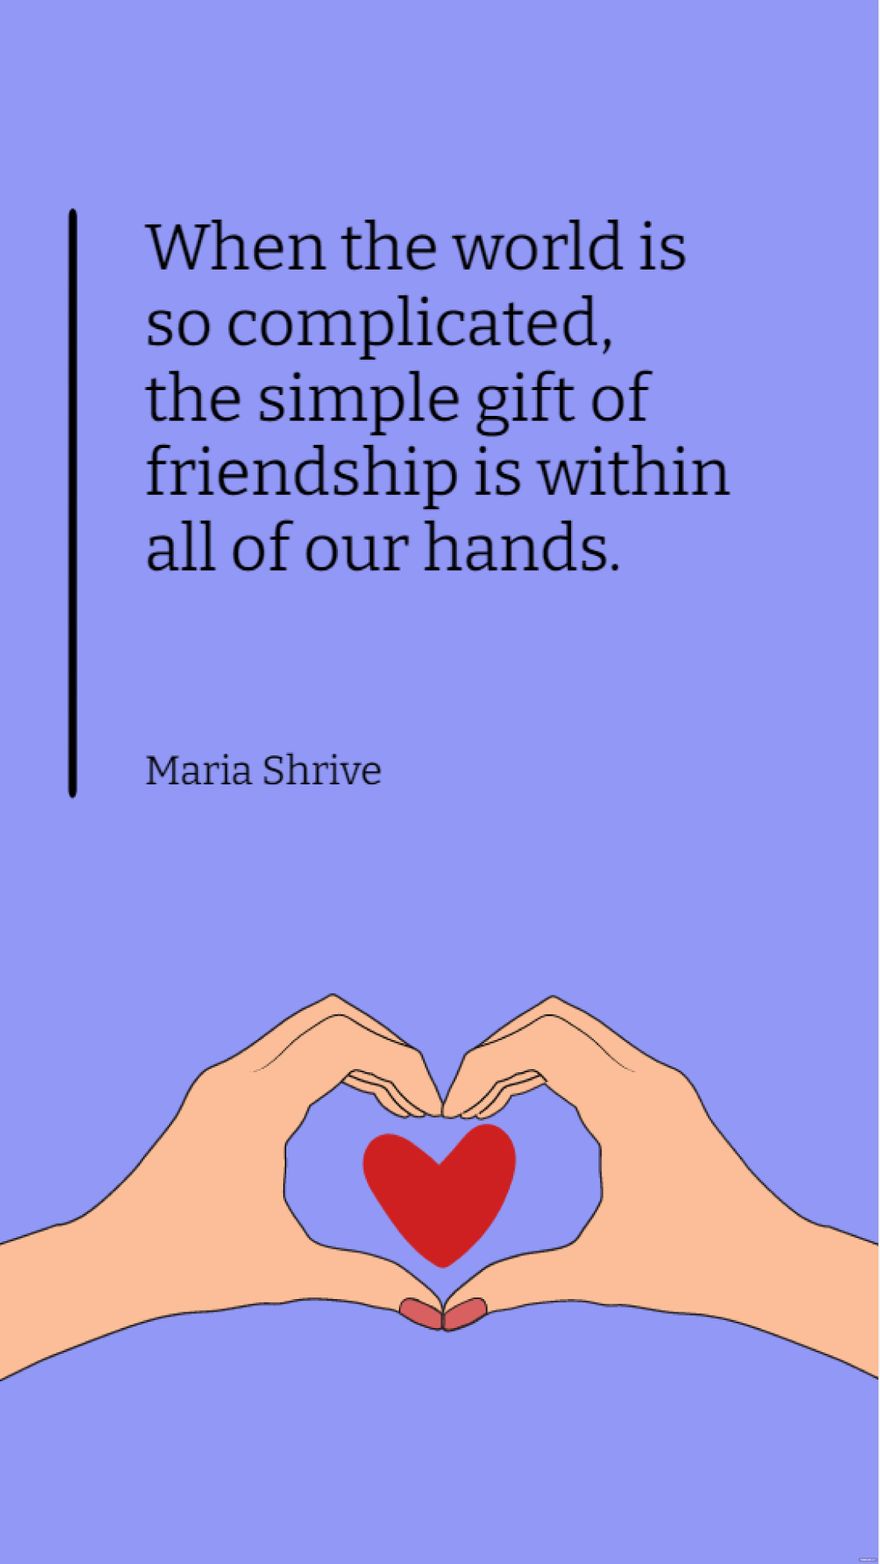 Maria Shrive  When the world is so complicated the simple gift of friendship is within all of our hands